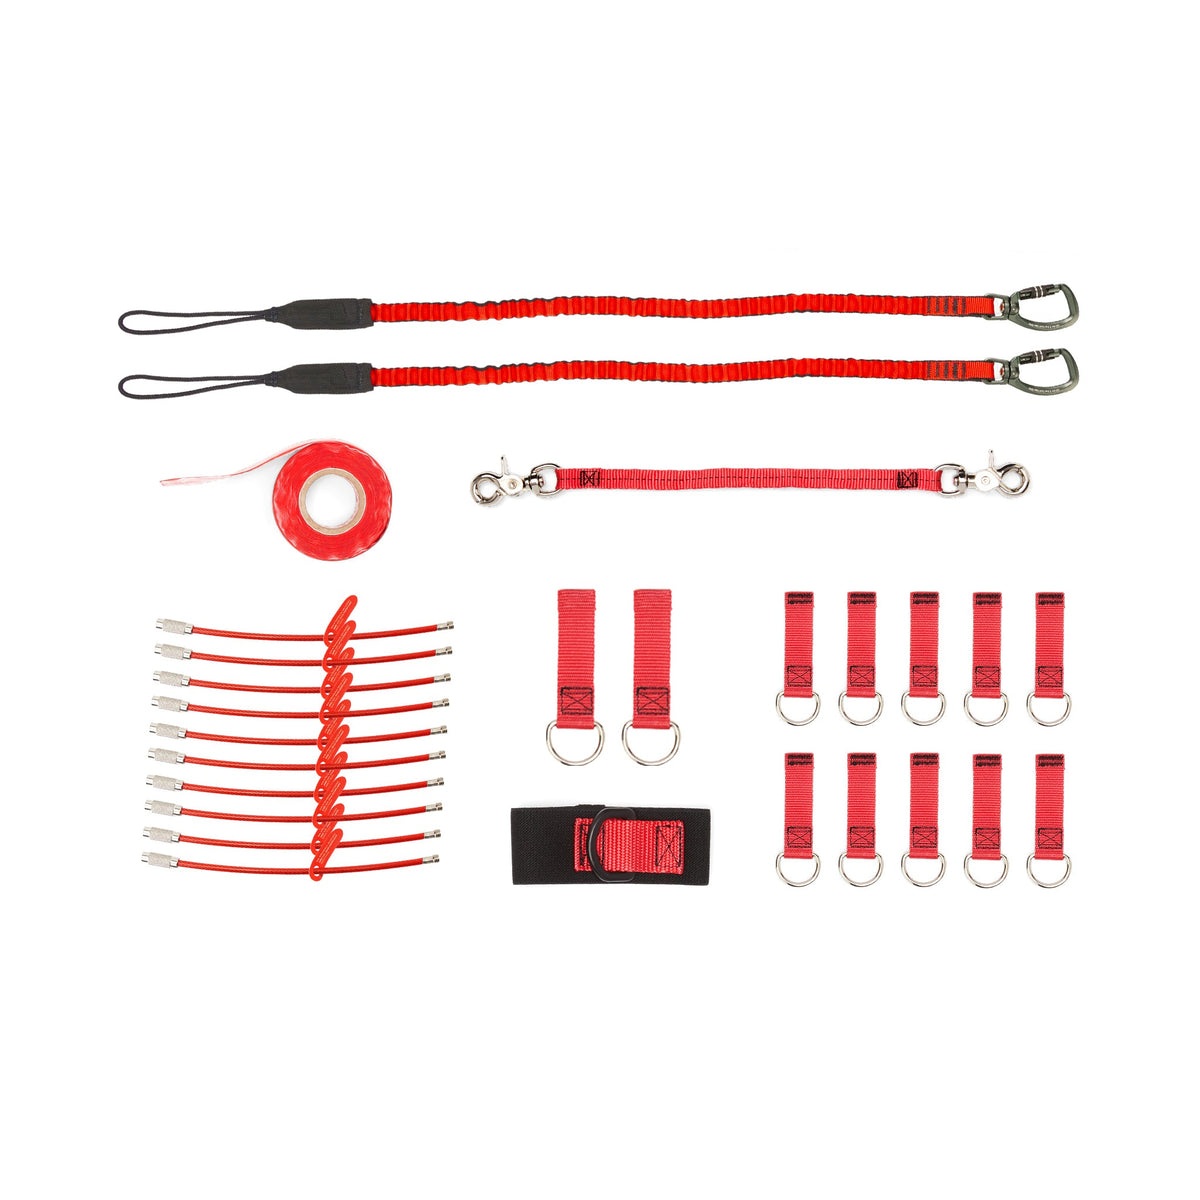 Riggers Trade Kit